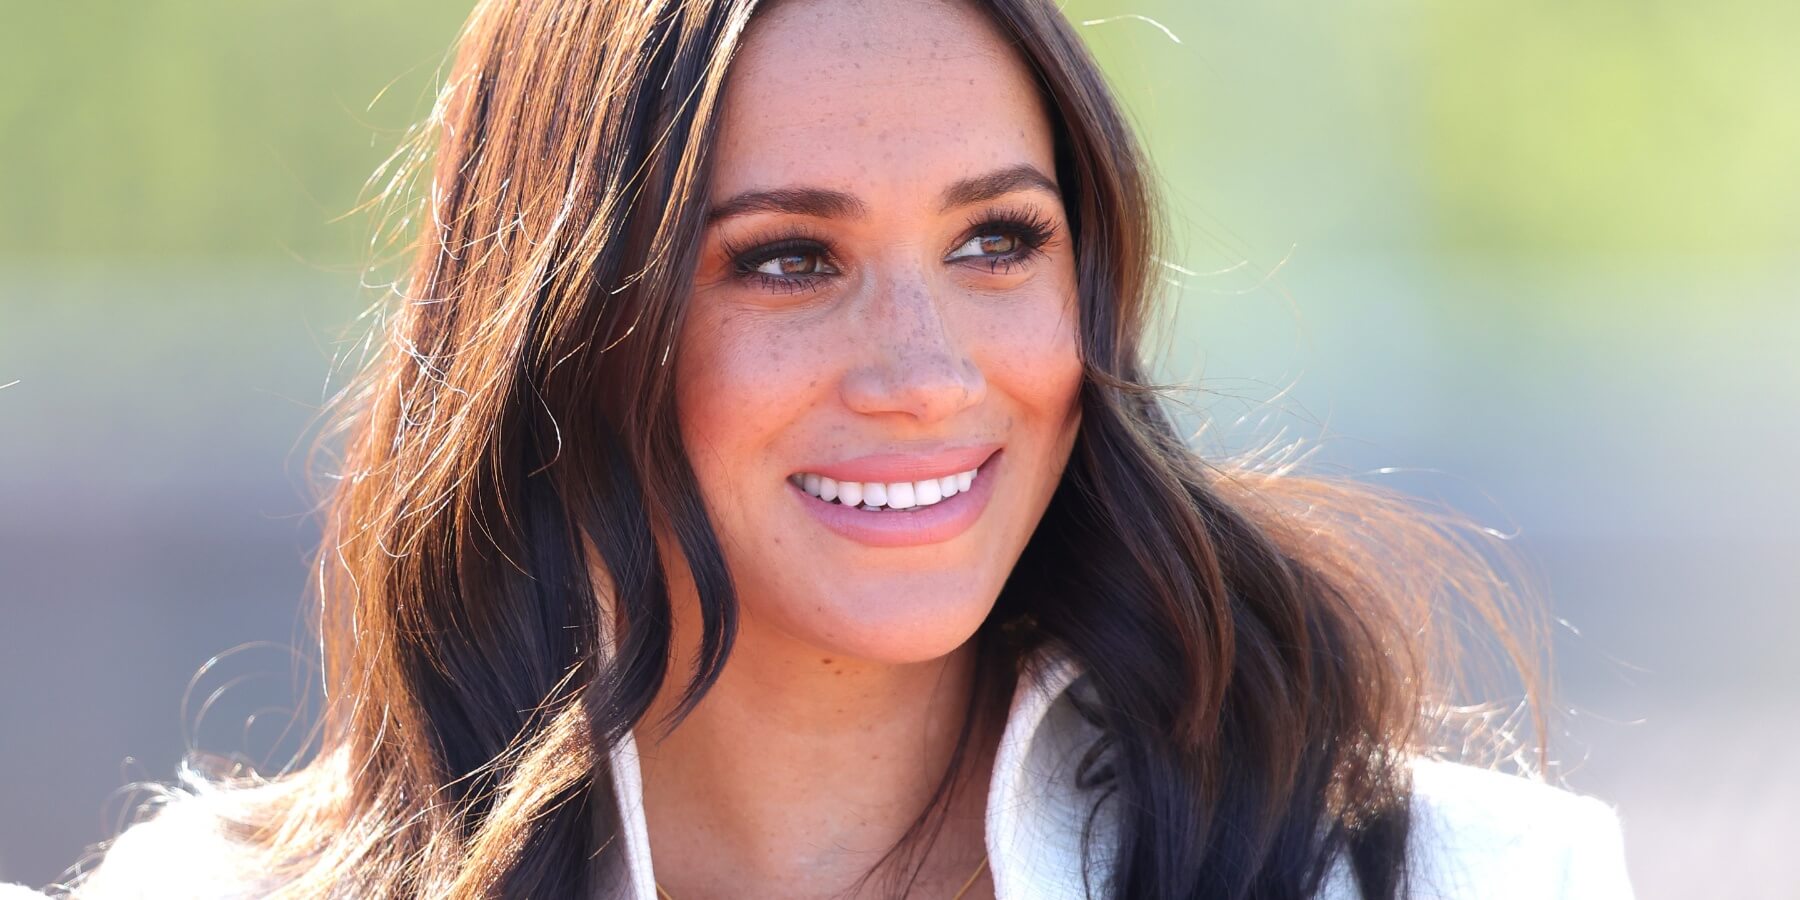 Meghan Markle believes in an overall approach to wellness.